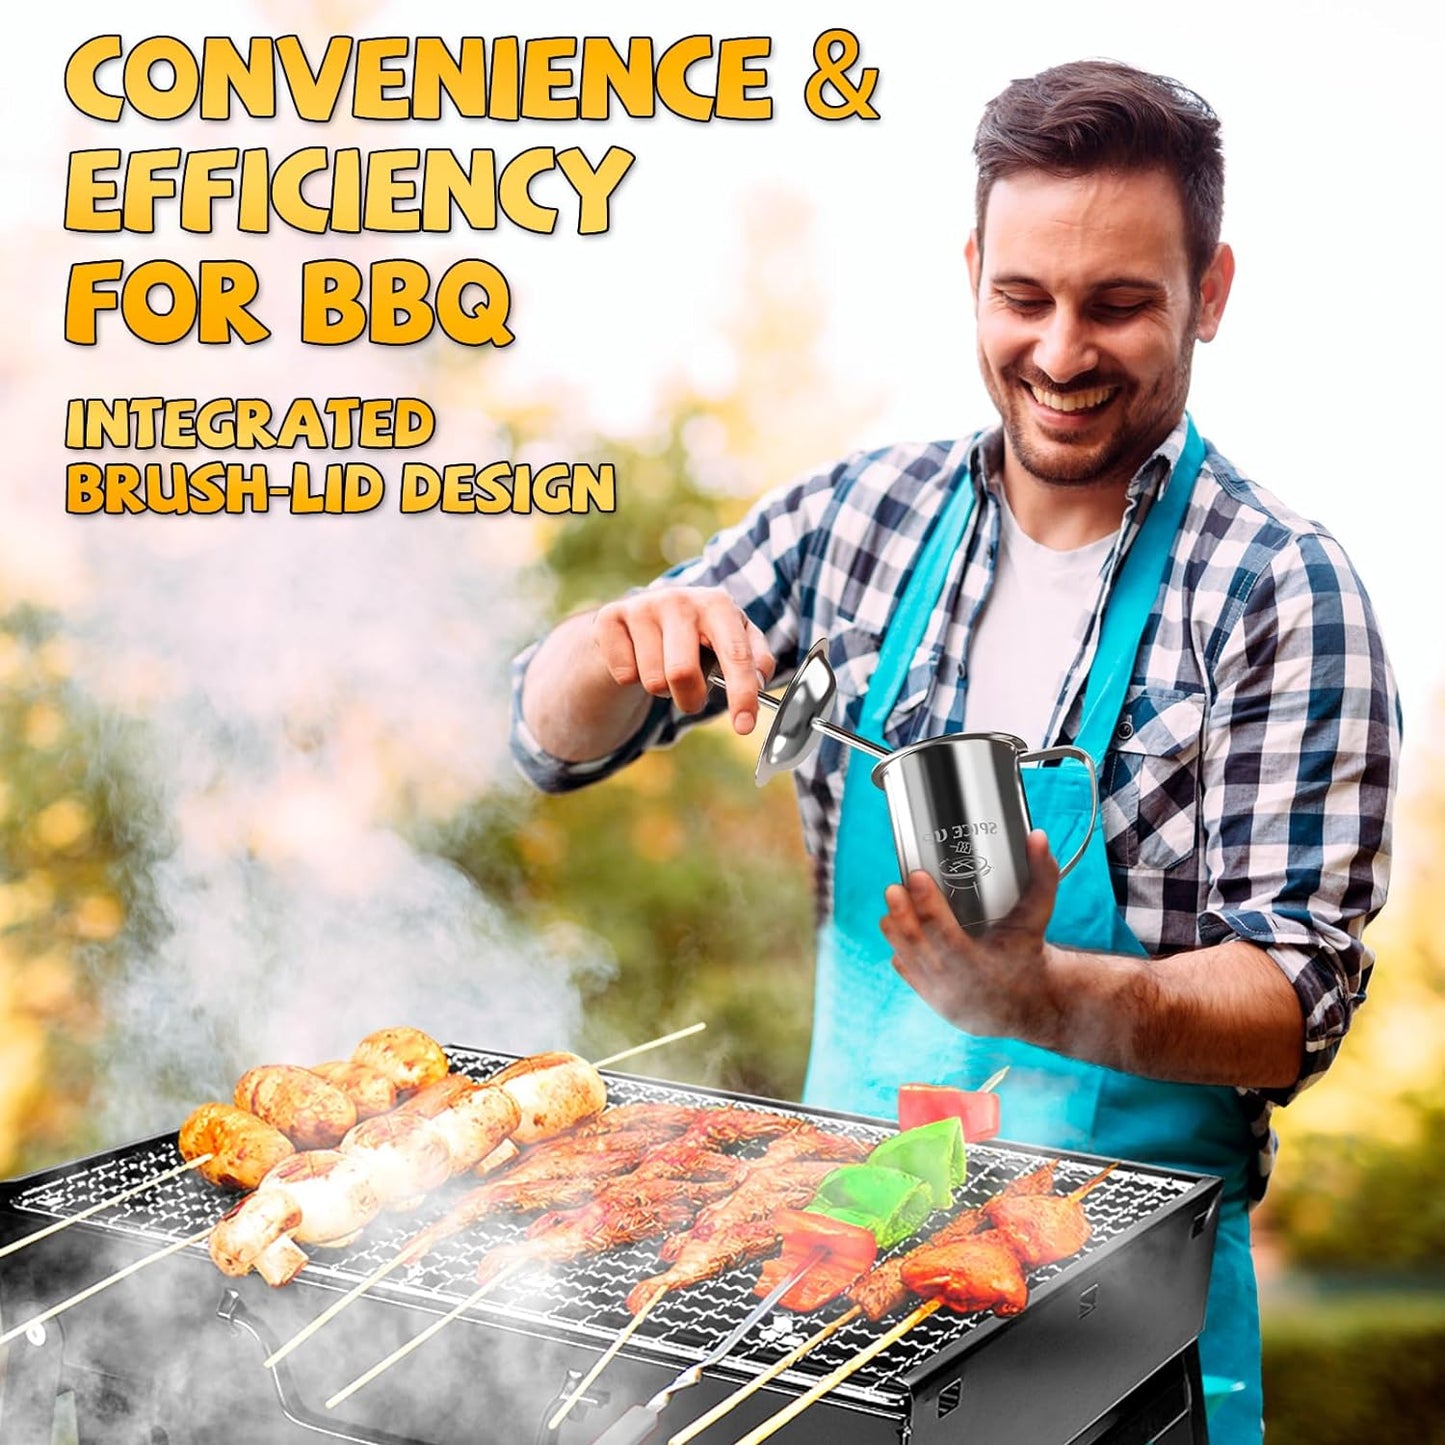 Grilling Accessories Men Women Gifts - BBQ Baster Brush and Sauce Basting Pot Set Christmas Stocking Stuffers Dad Mom Him Grandparents Chef Tools Smoker Unique Cooking Gadgets Kitchen Essentials